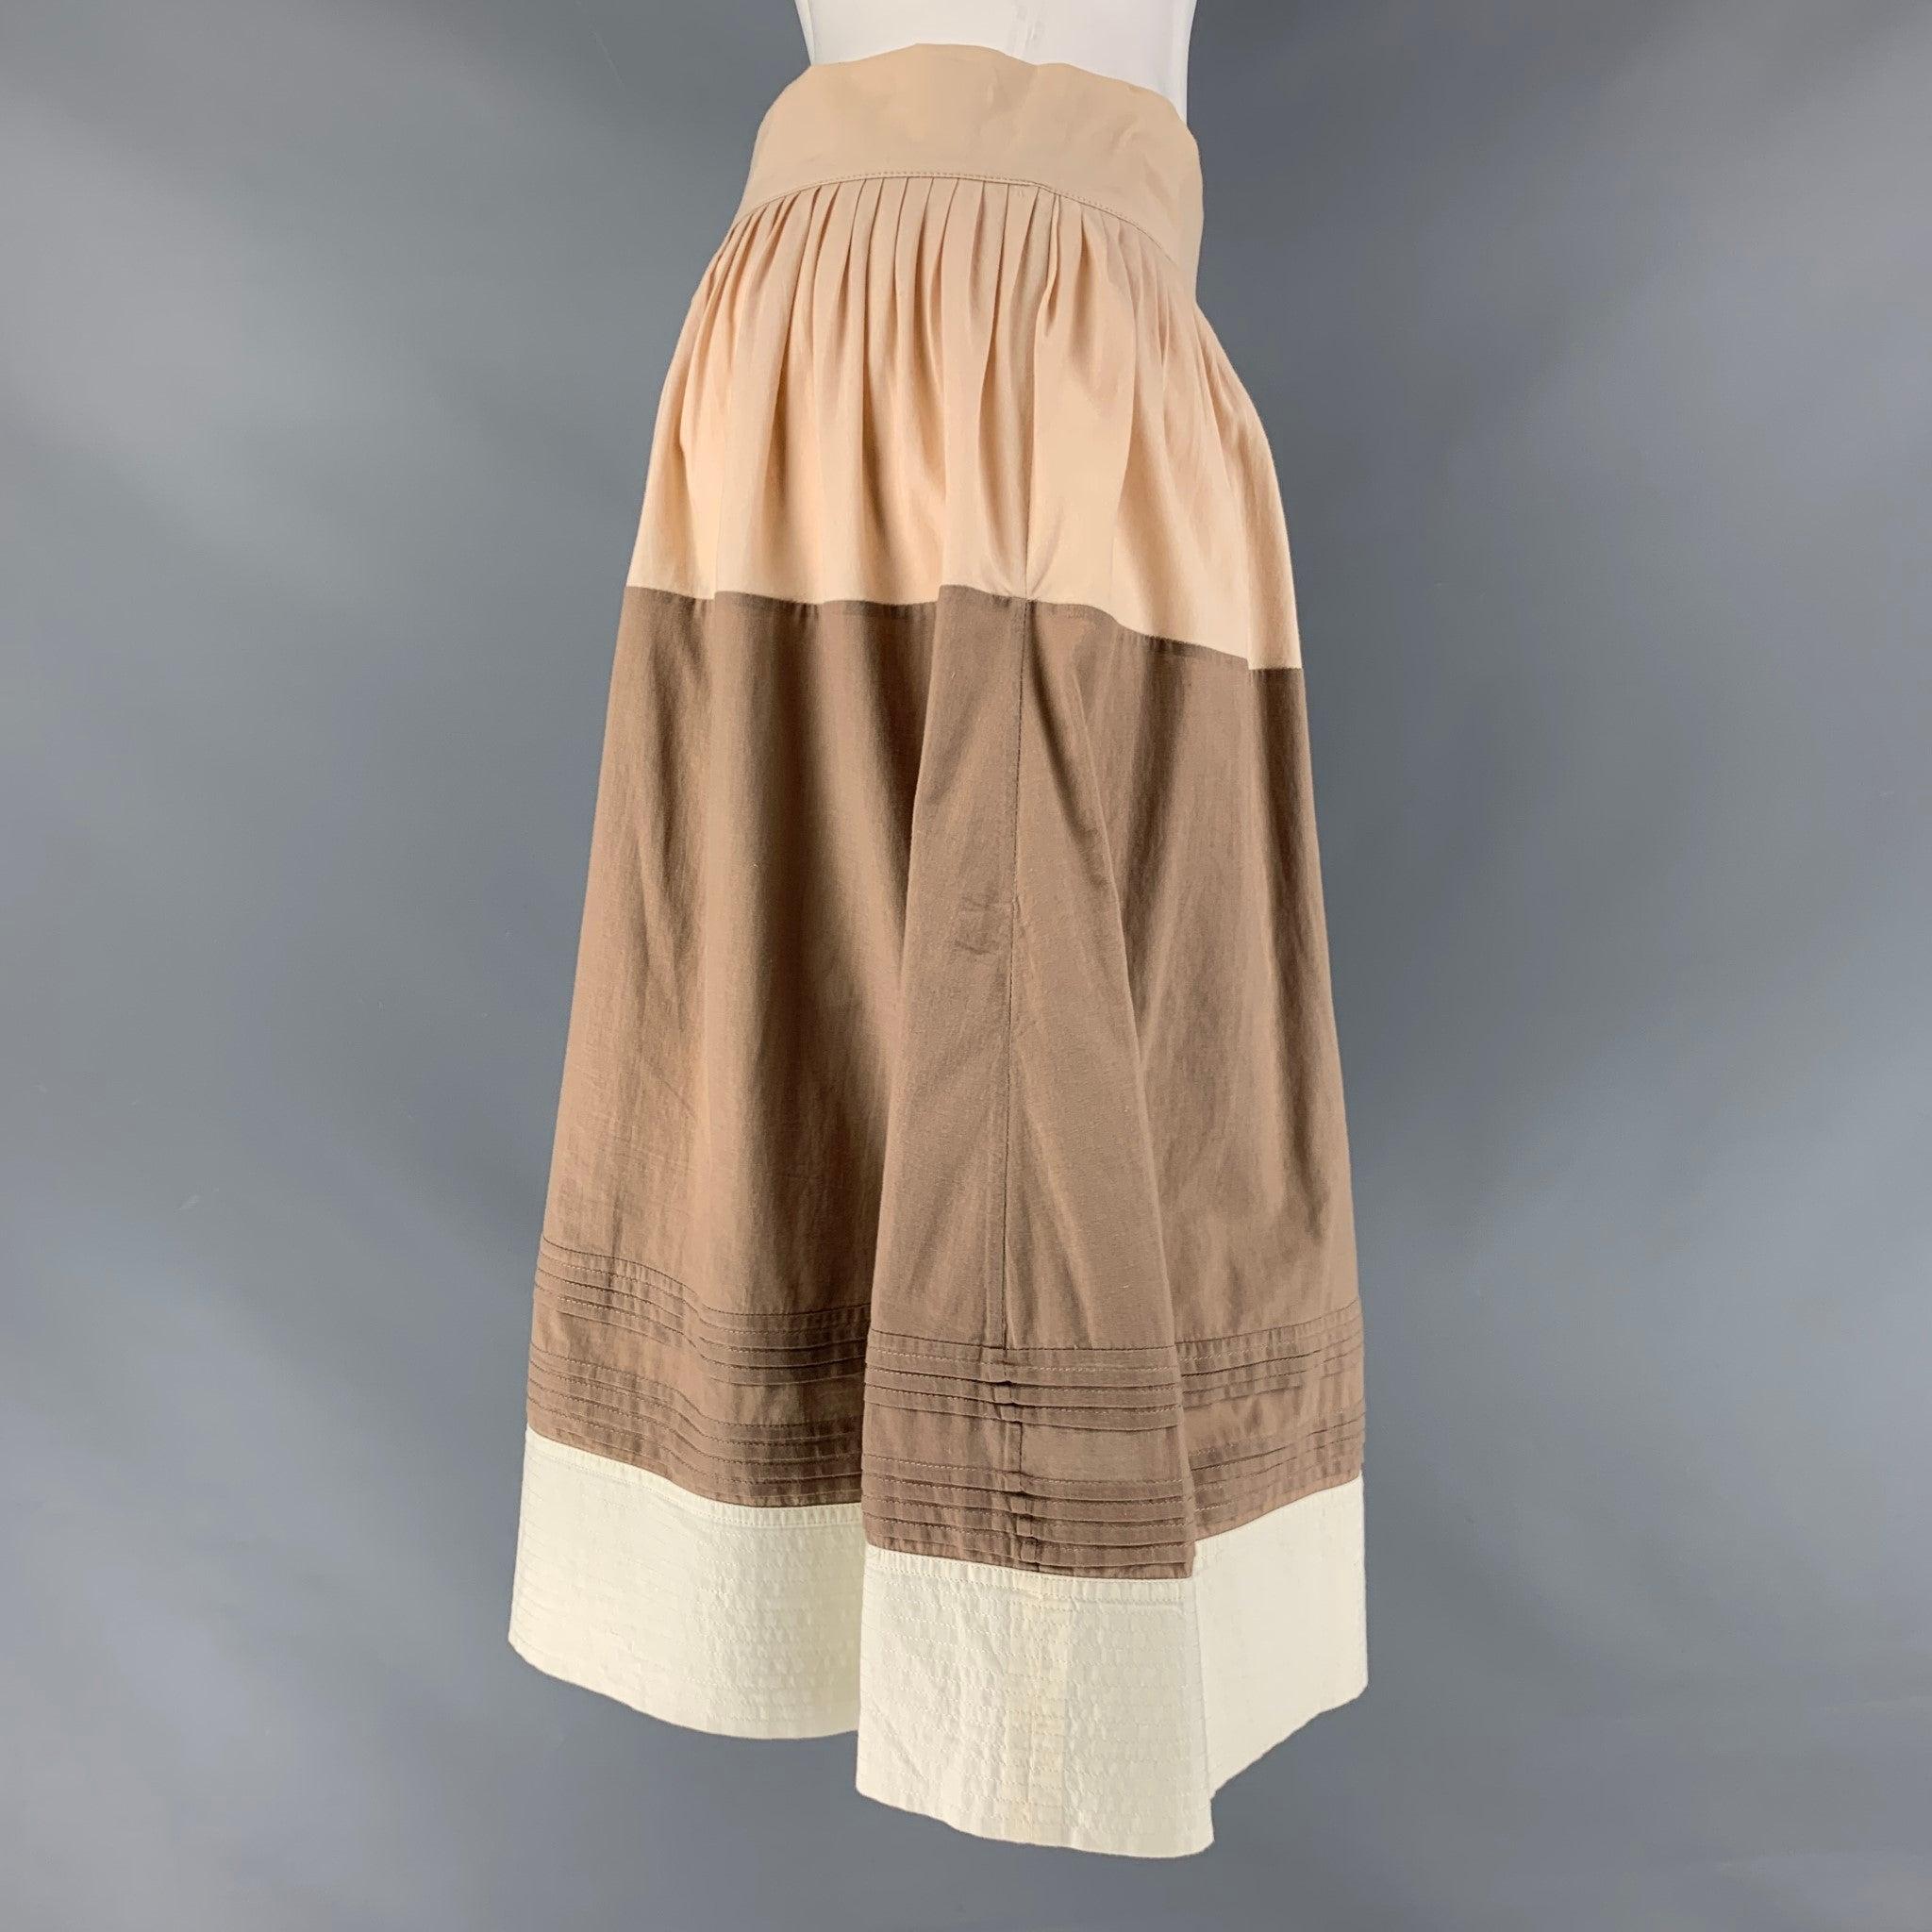 MARNI skirt comes in a beige and brown cotton featuring a pleated style, tie closure at side. Made in Italy.Excellent Pre-Owned Condition. 

Marked:  
38 

Measurements: 
  Waist: 27 inches Hip: 42 inches Length: 24 inches  
  
  
 
Reference: